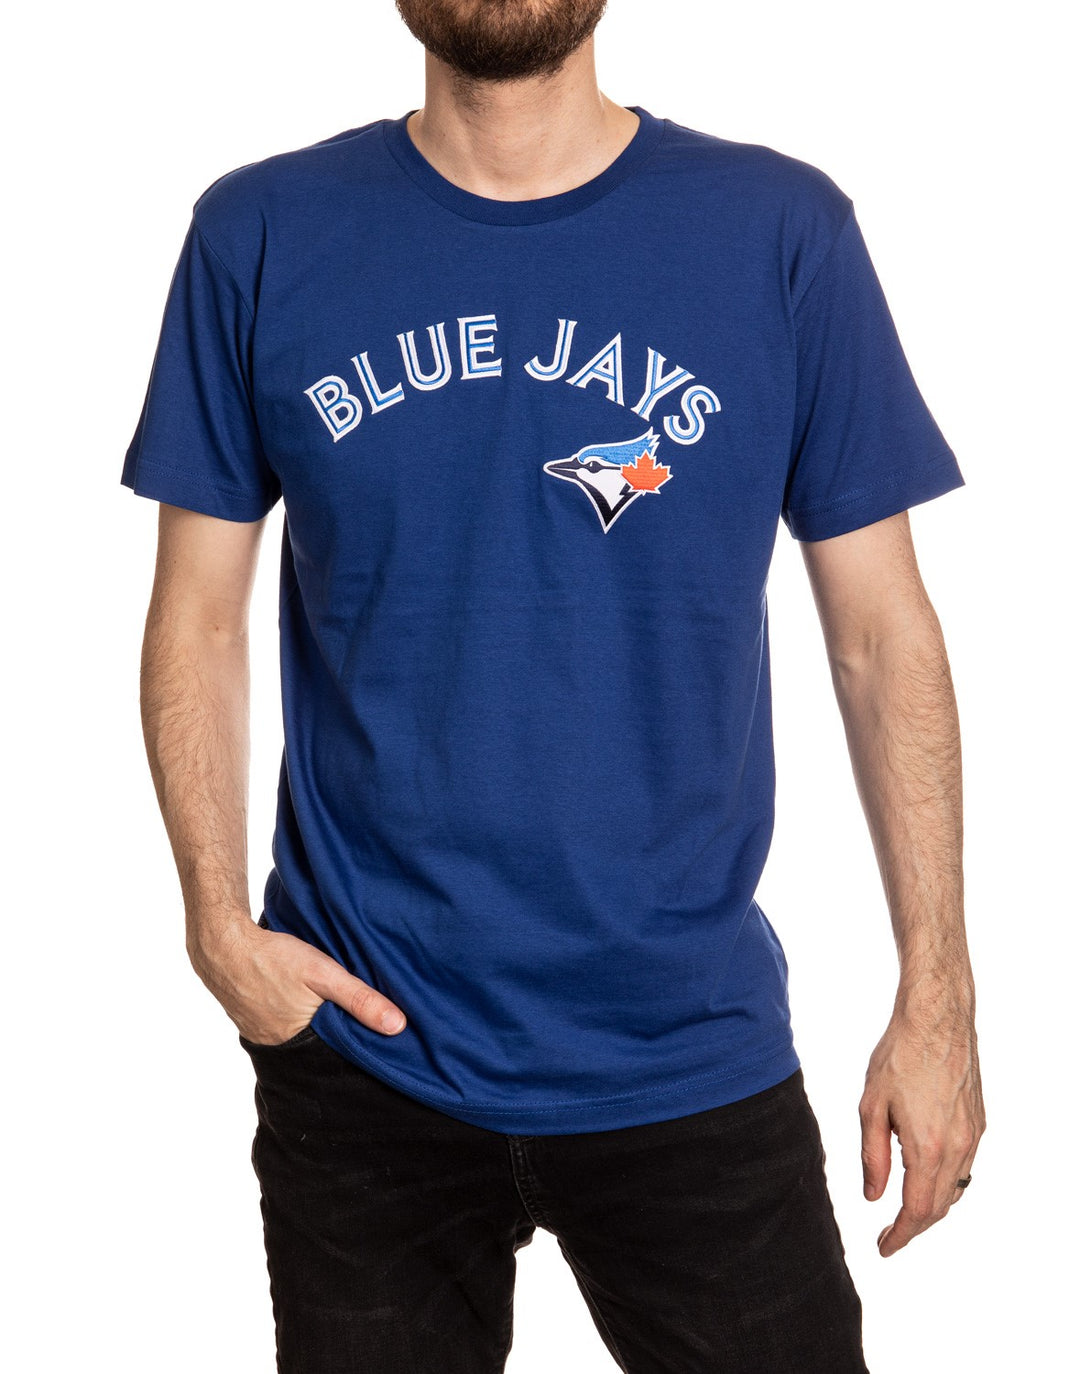 Toronto Blue Jays Emroidered Shirt Fromt View